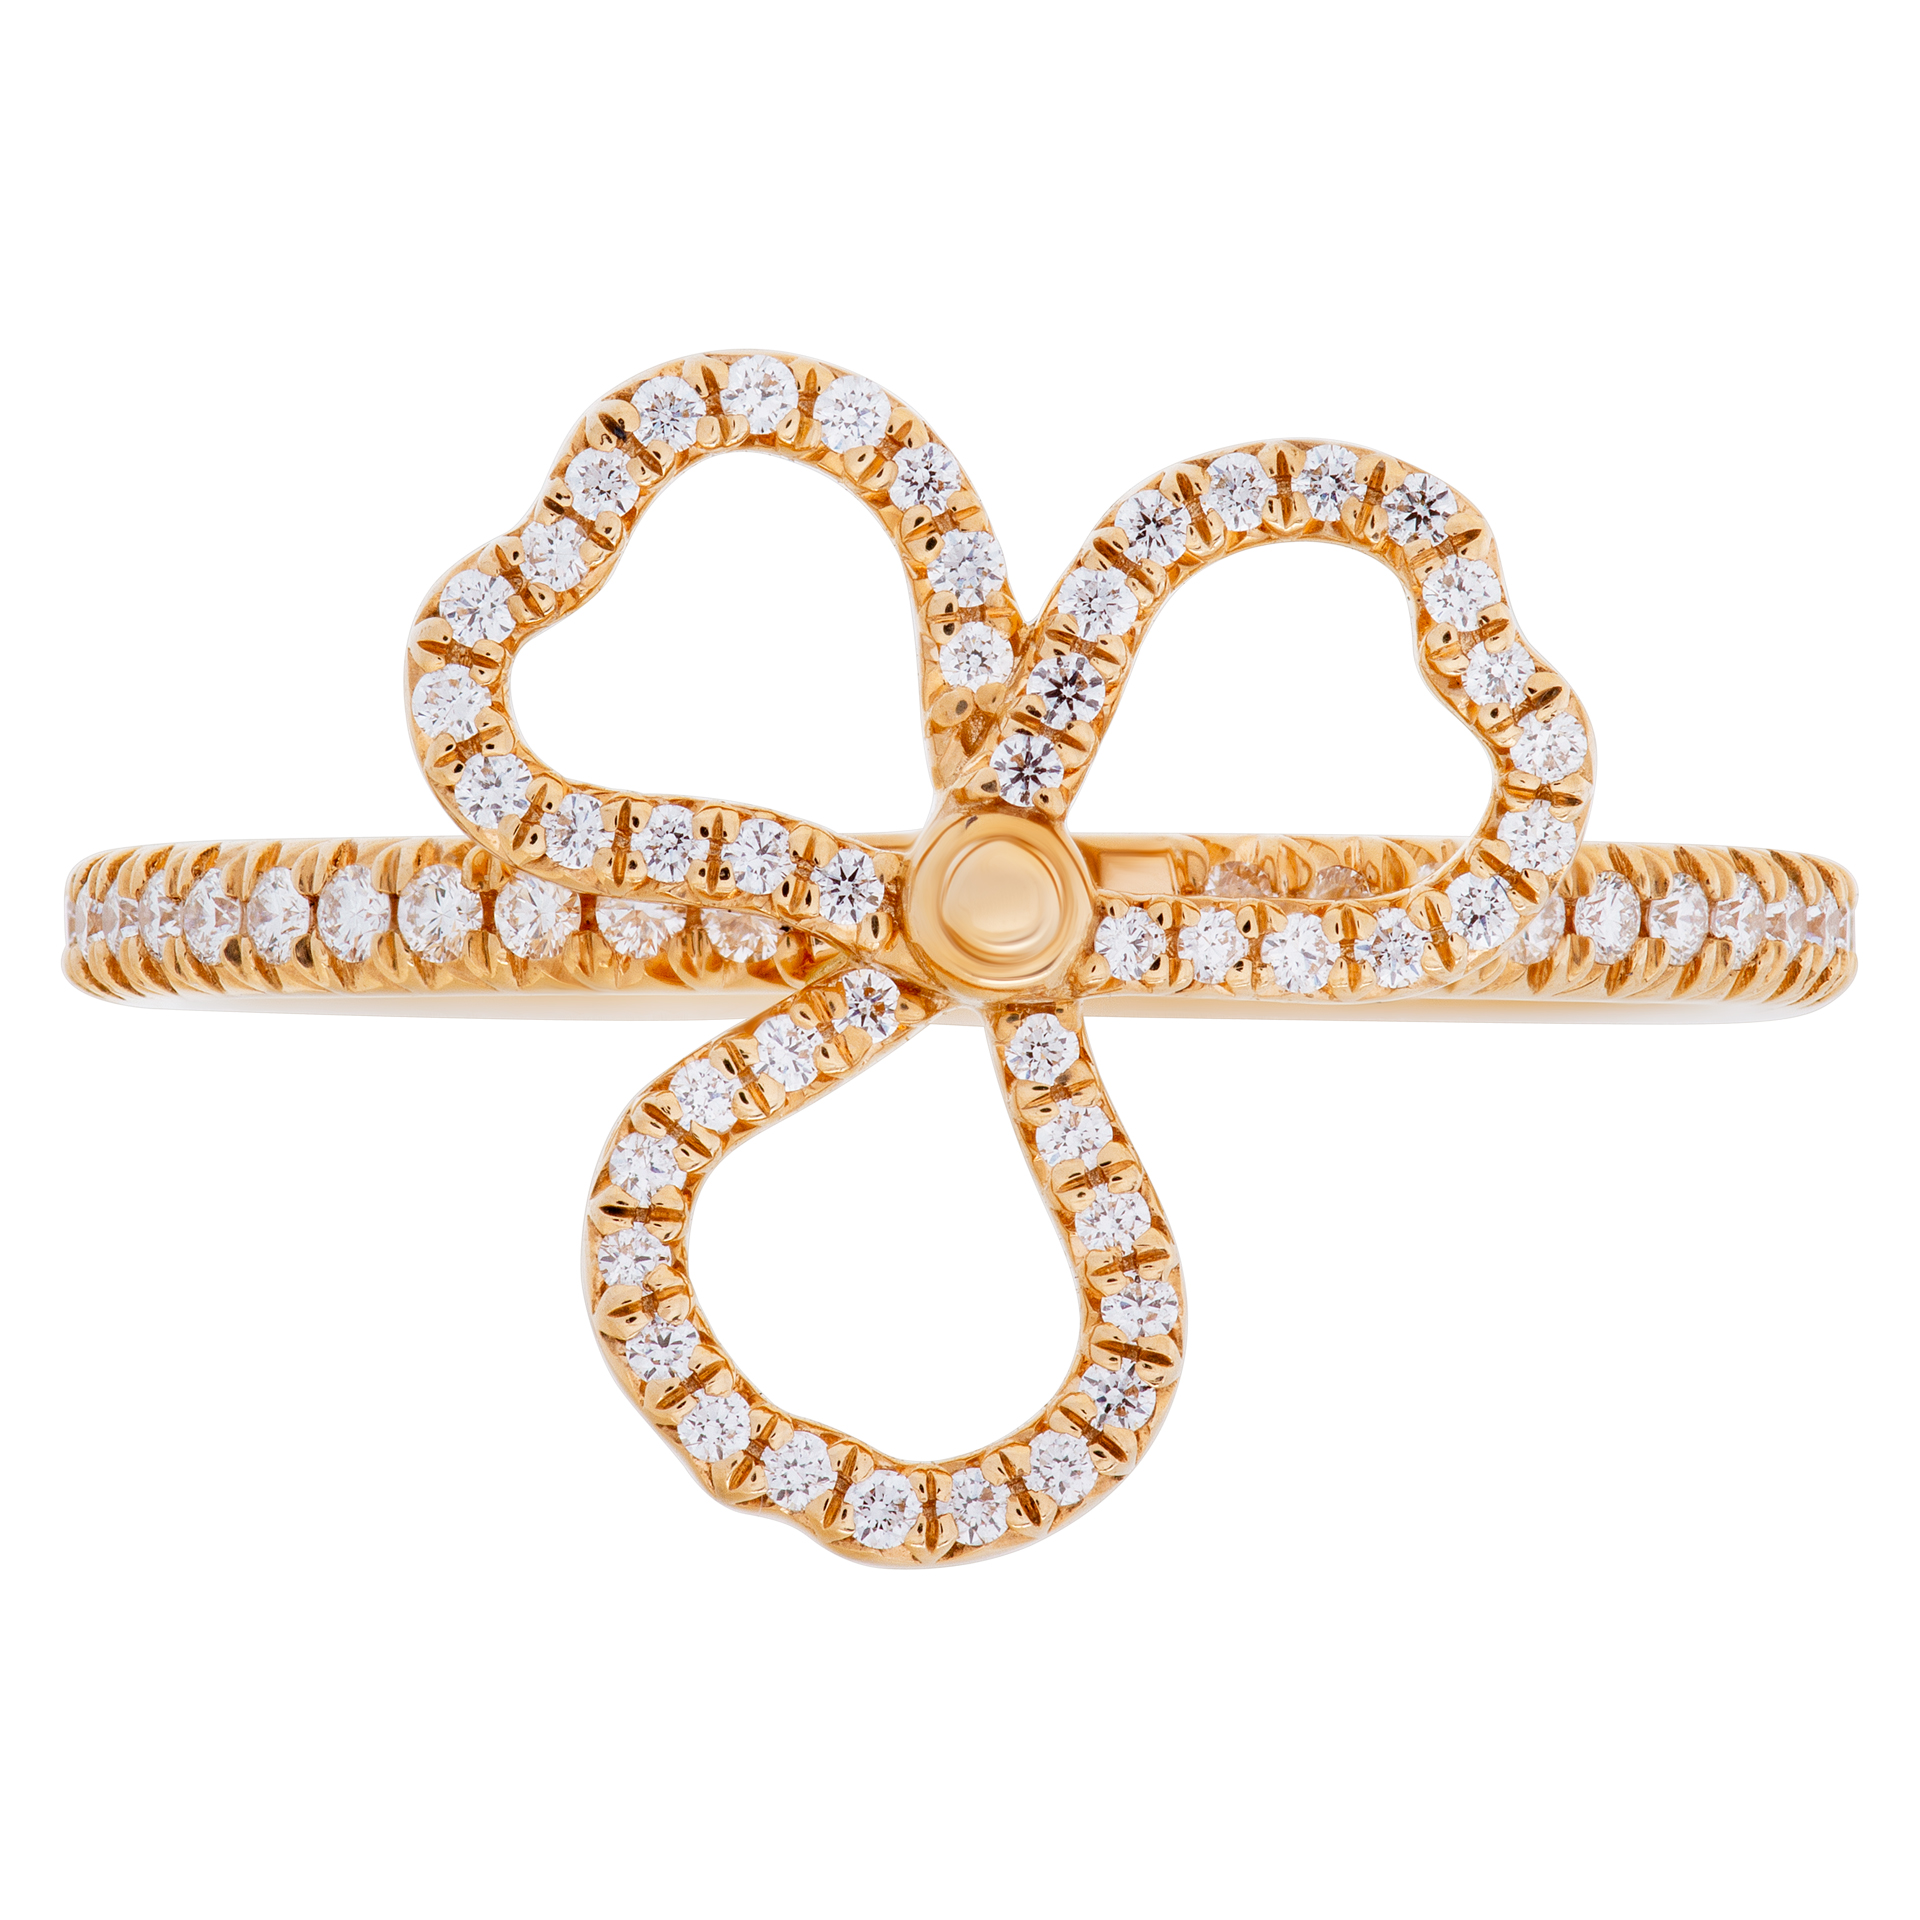 Tiffany & Co. "Paper Flowers" collection, open 3 leaves clover ring with 0.14 carat in diamonds, set in 18k rose gold image 2